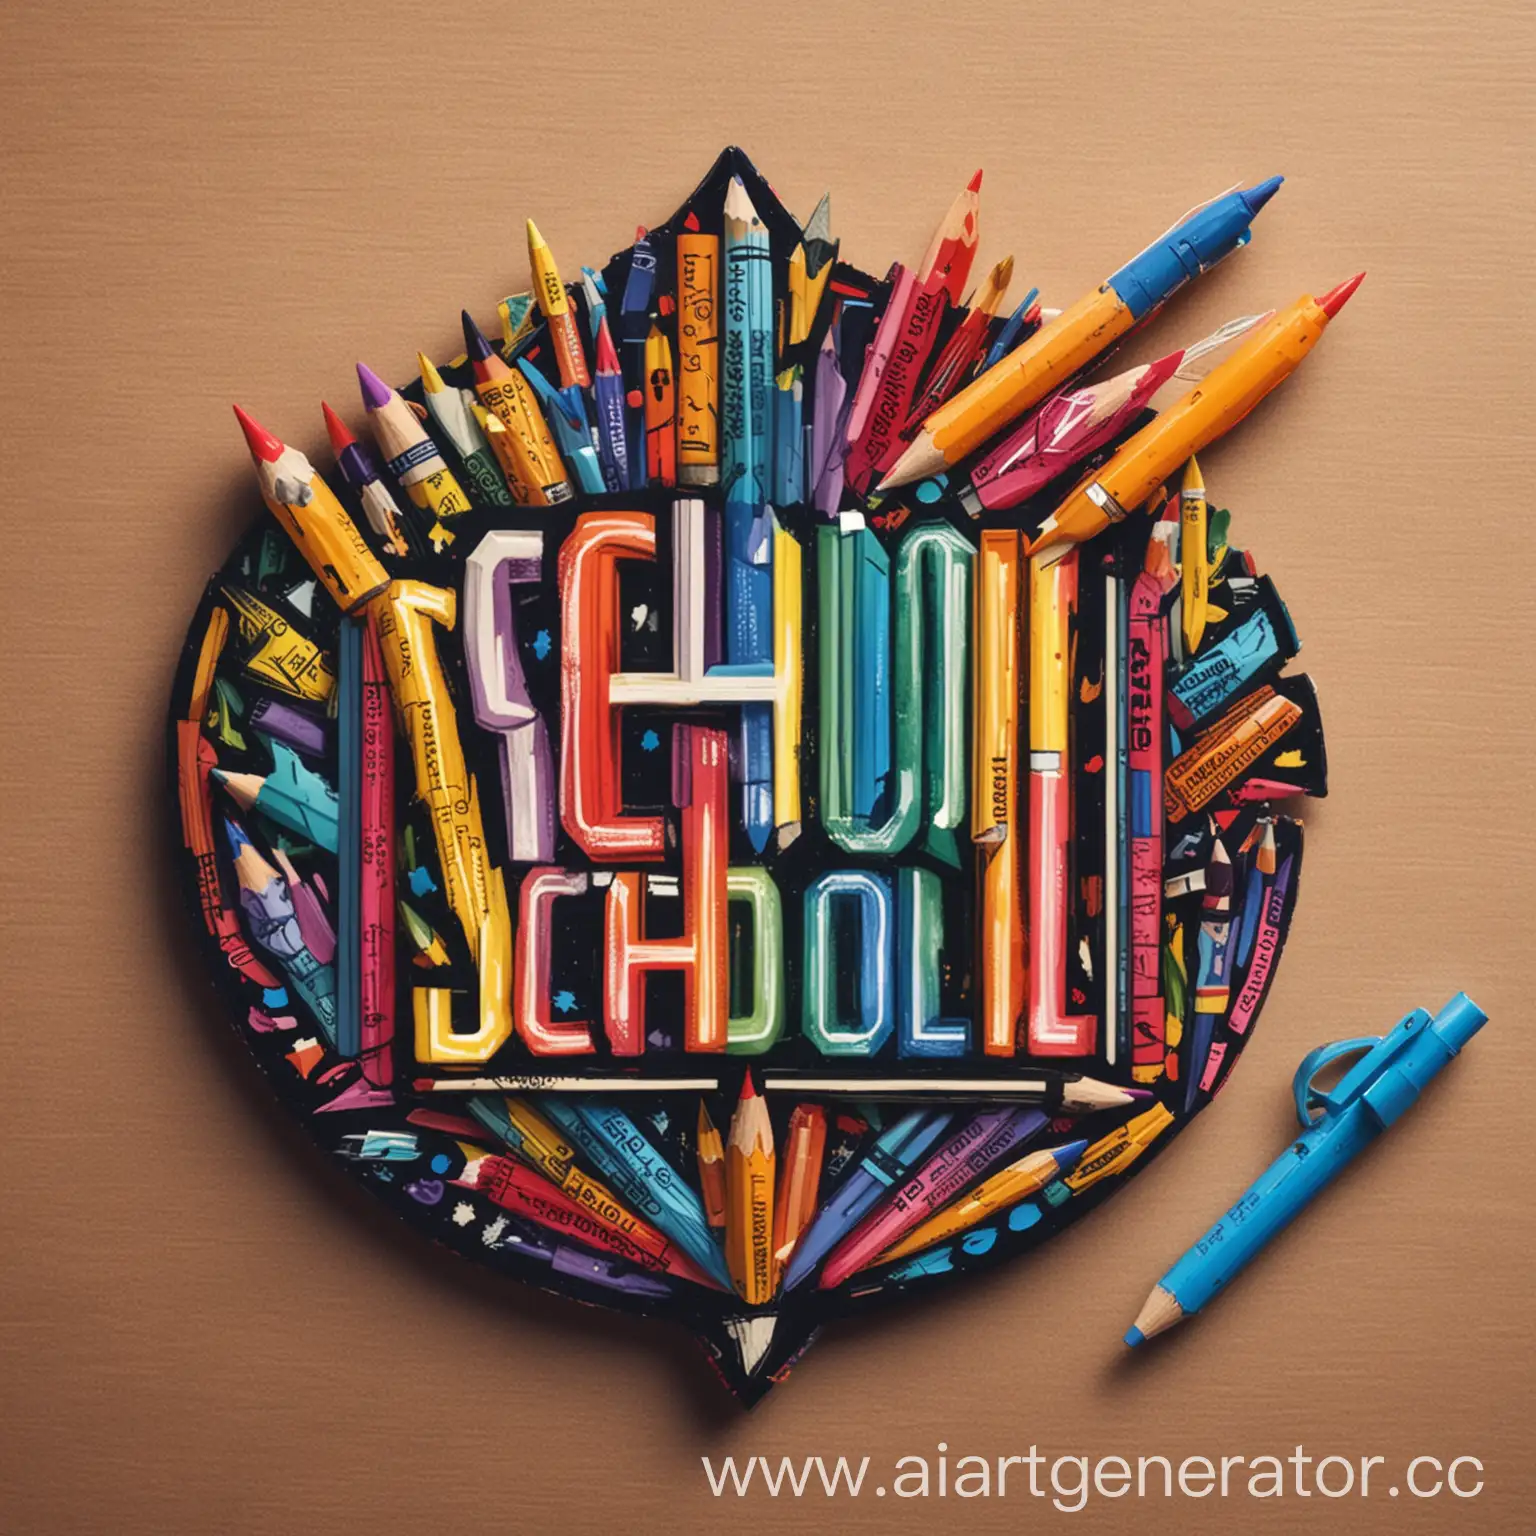 Vibrant-School-Logo-Created-with-Books-Notebooks-Pens-and-Pencils